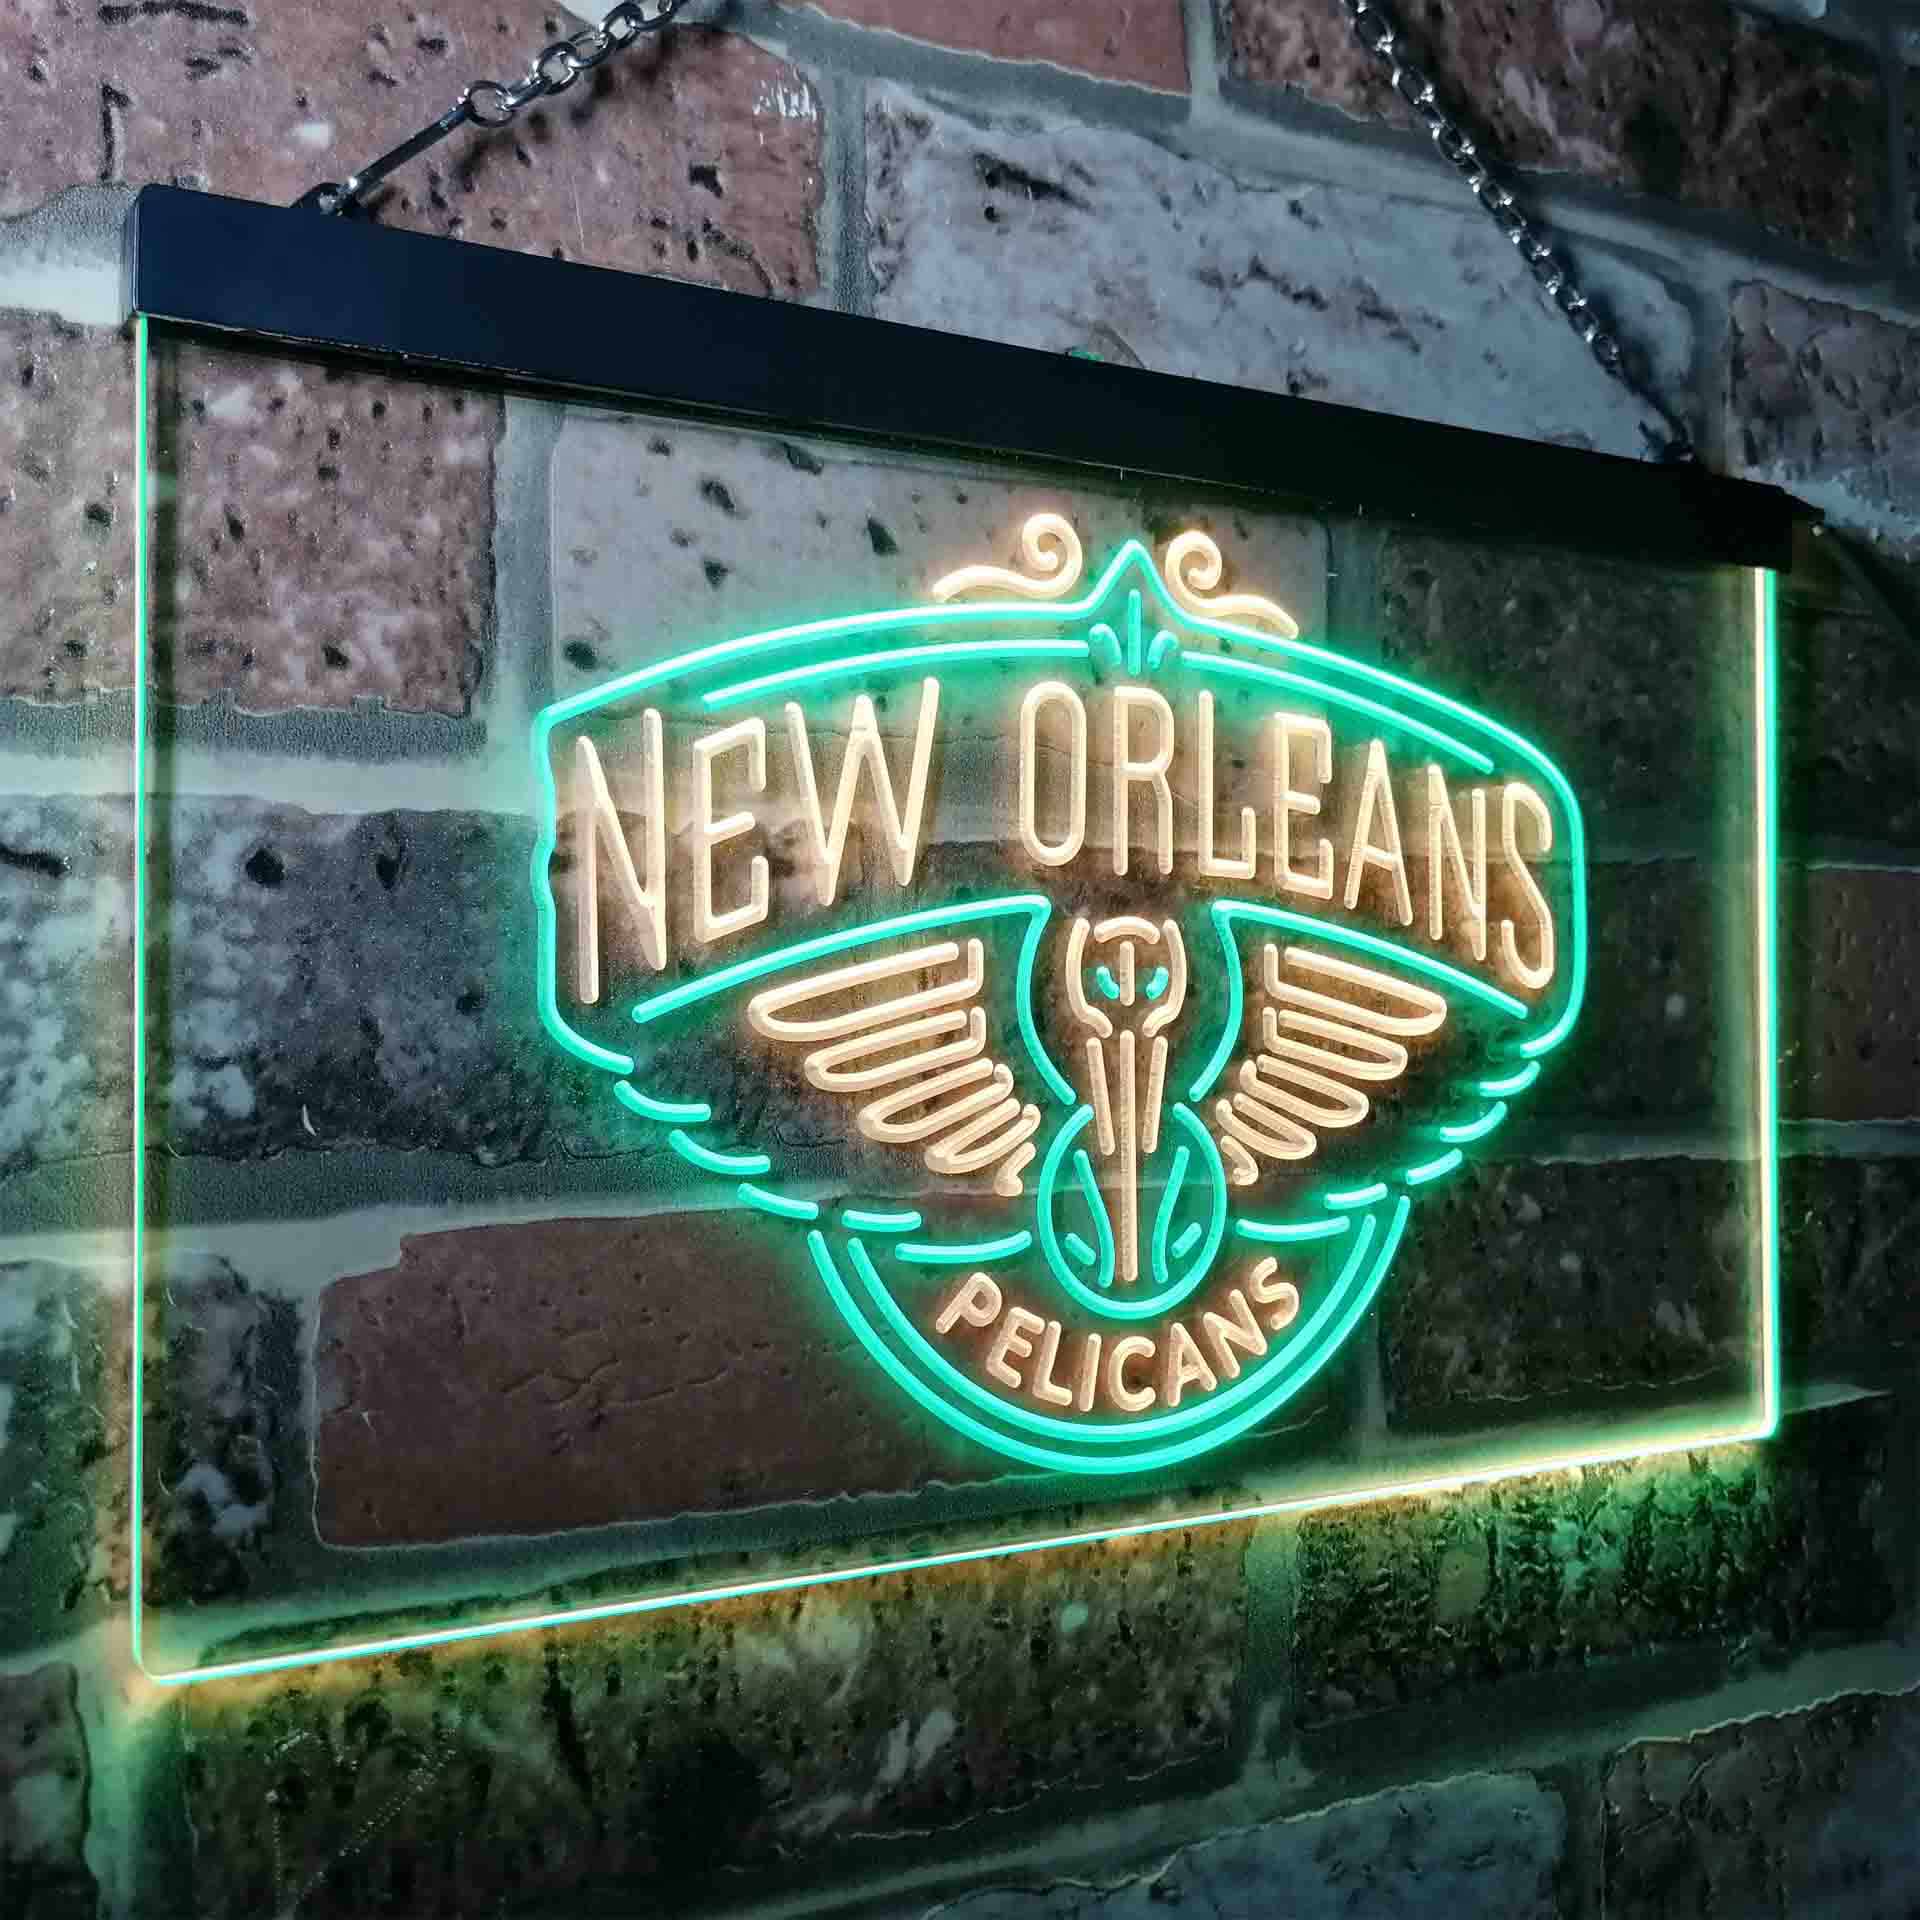 Baseball Club New Orleans League Pelicanss LED Neon Sign